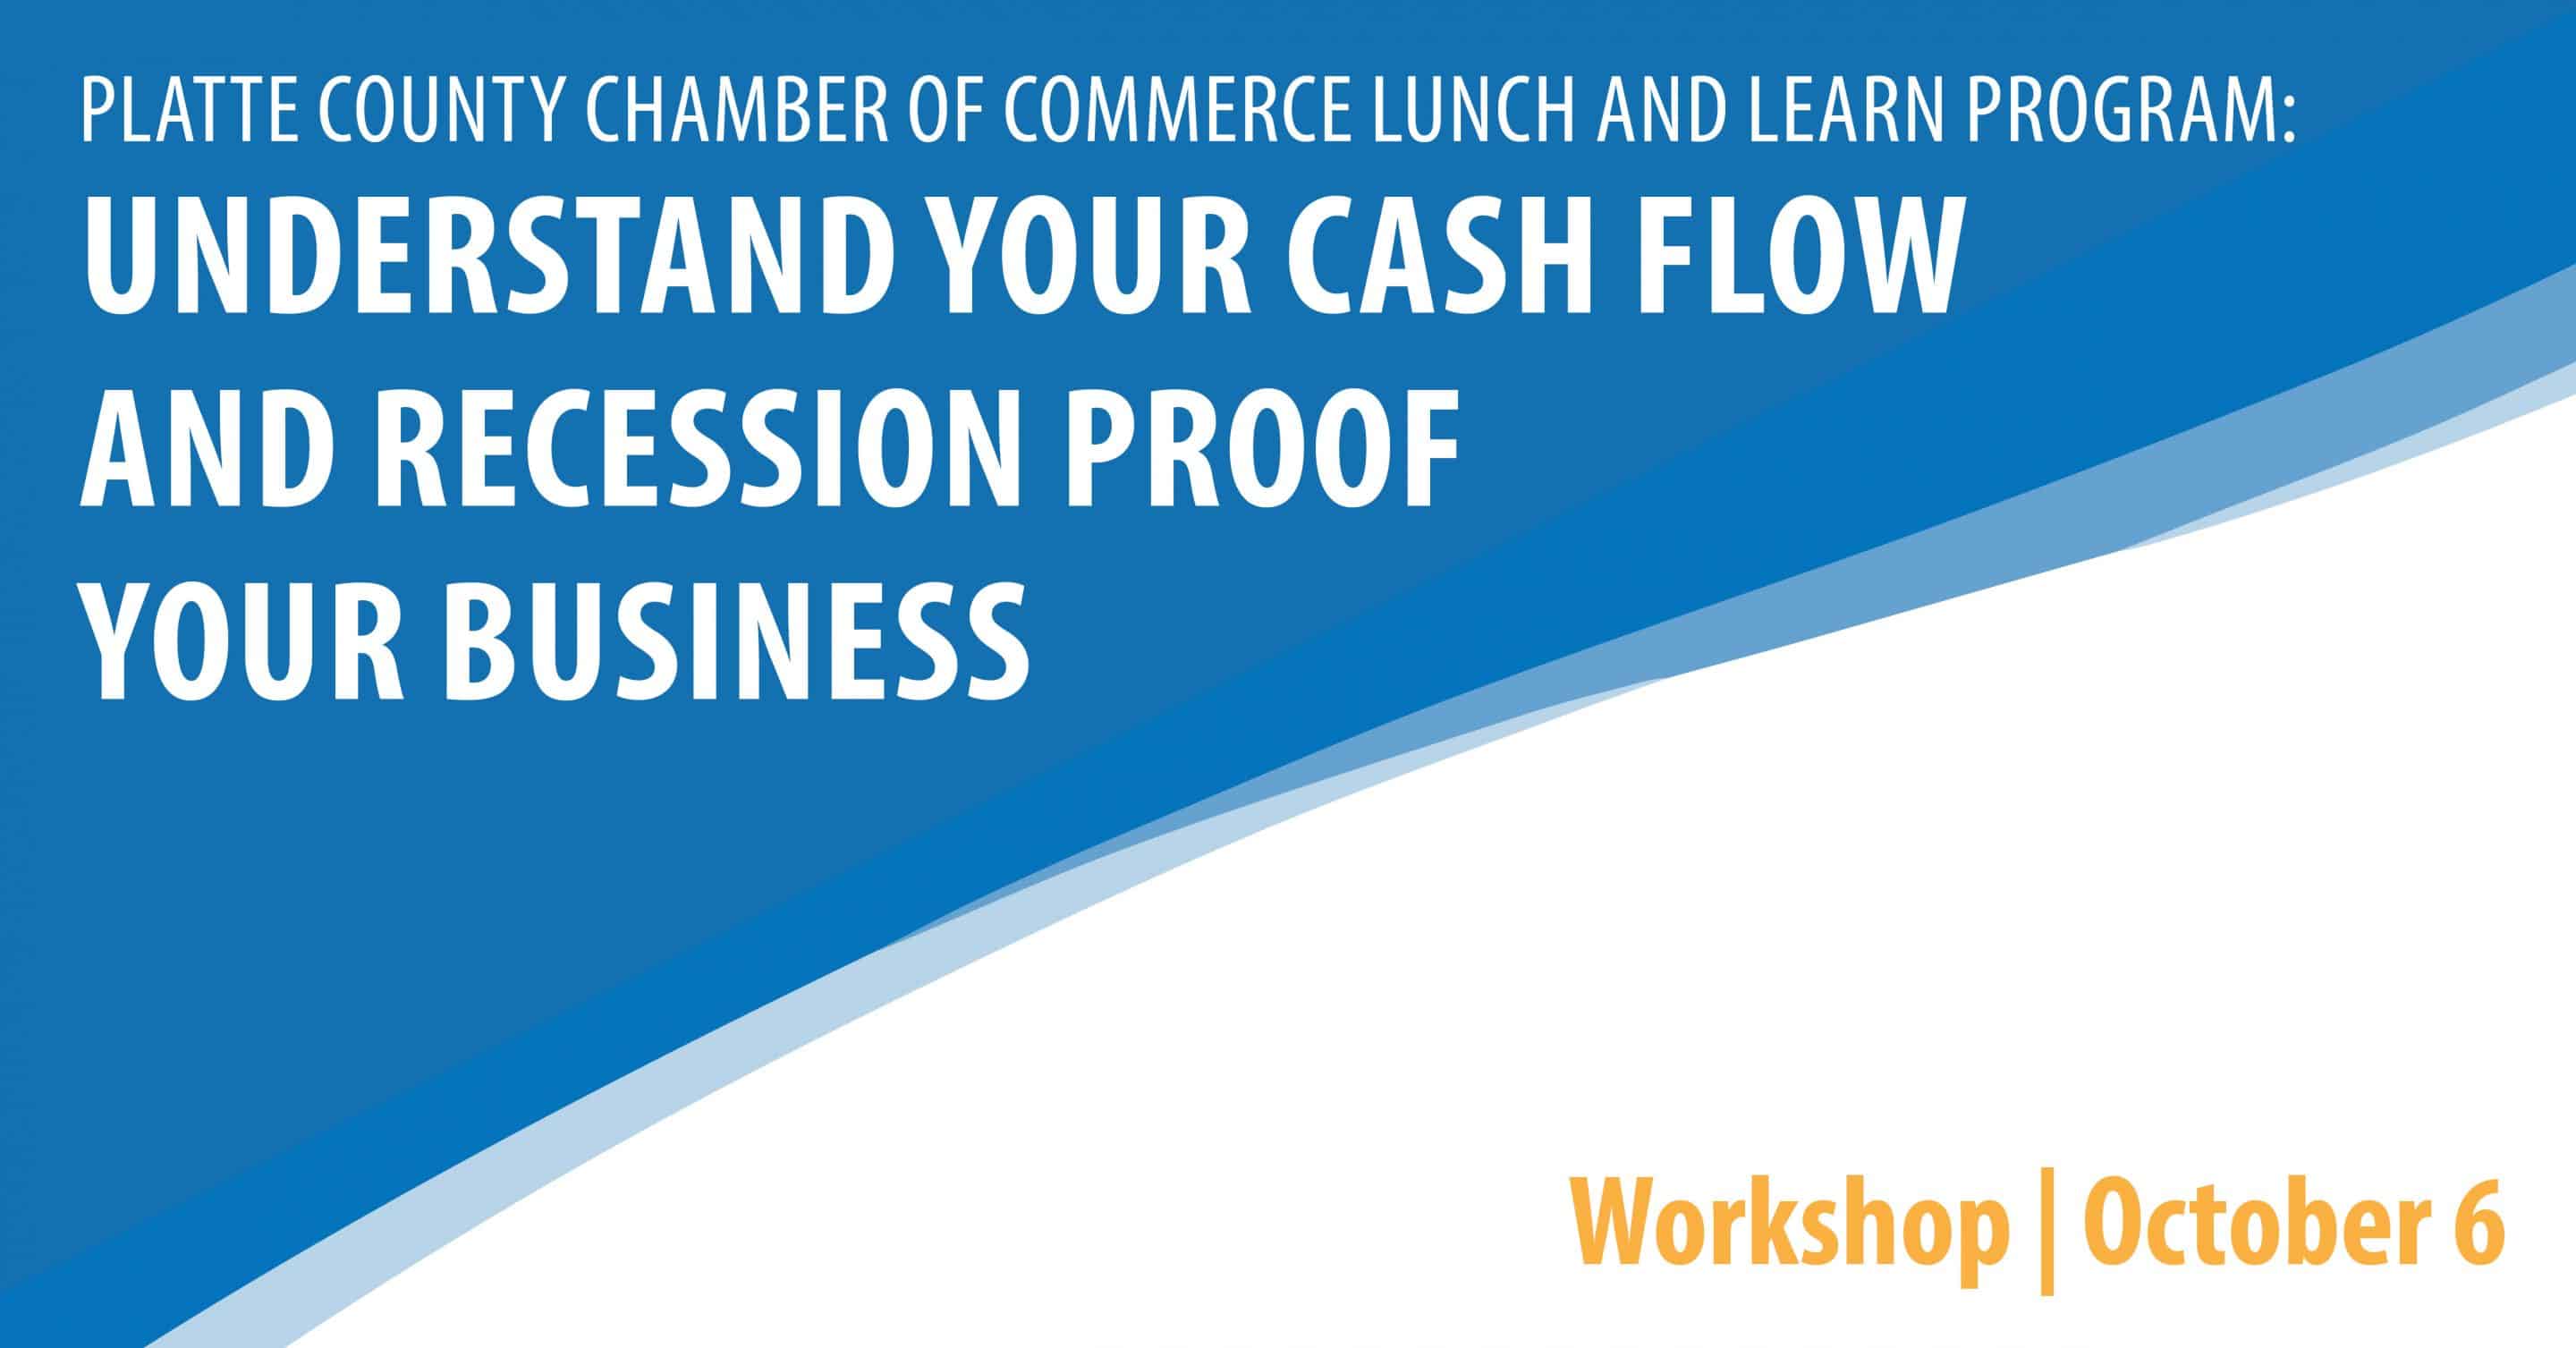 Platte County Chamber of Commerce Lunch and Learn Program: Understand your cash flow  and recession proof your business!